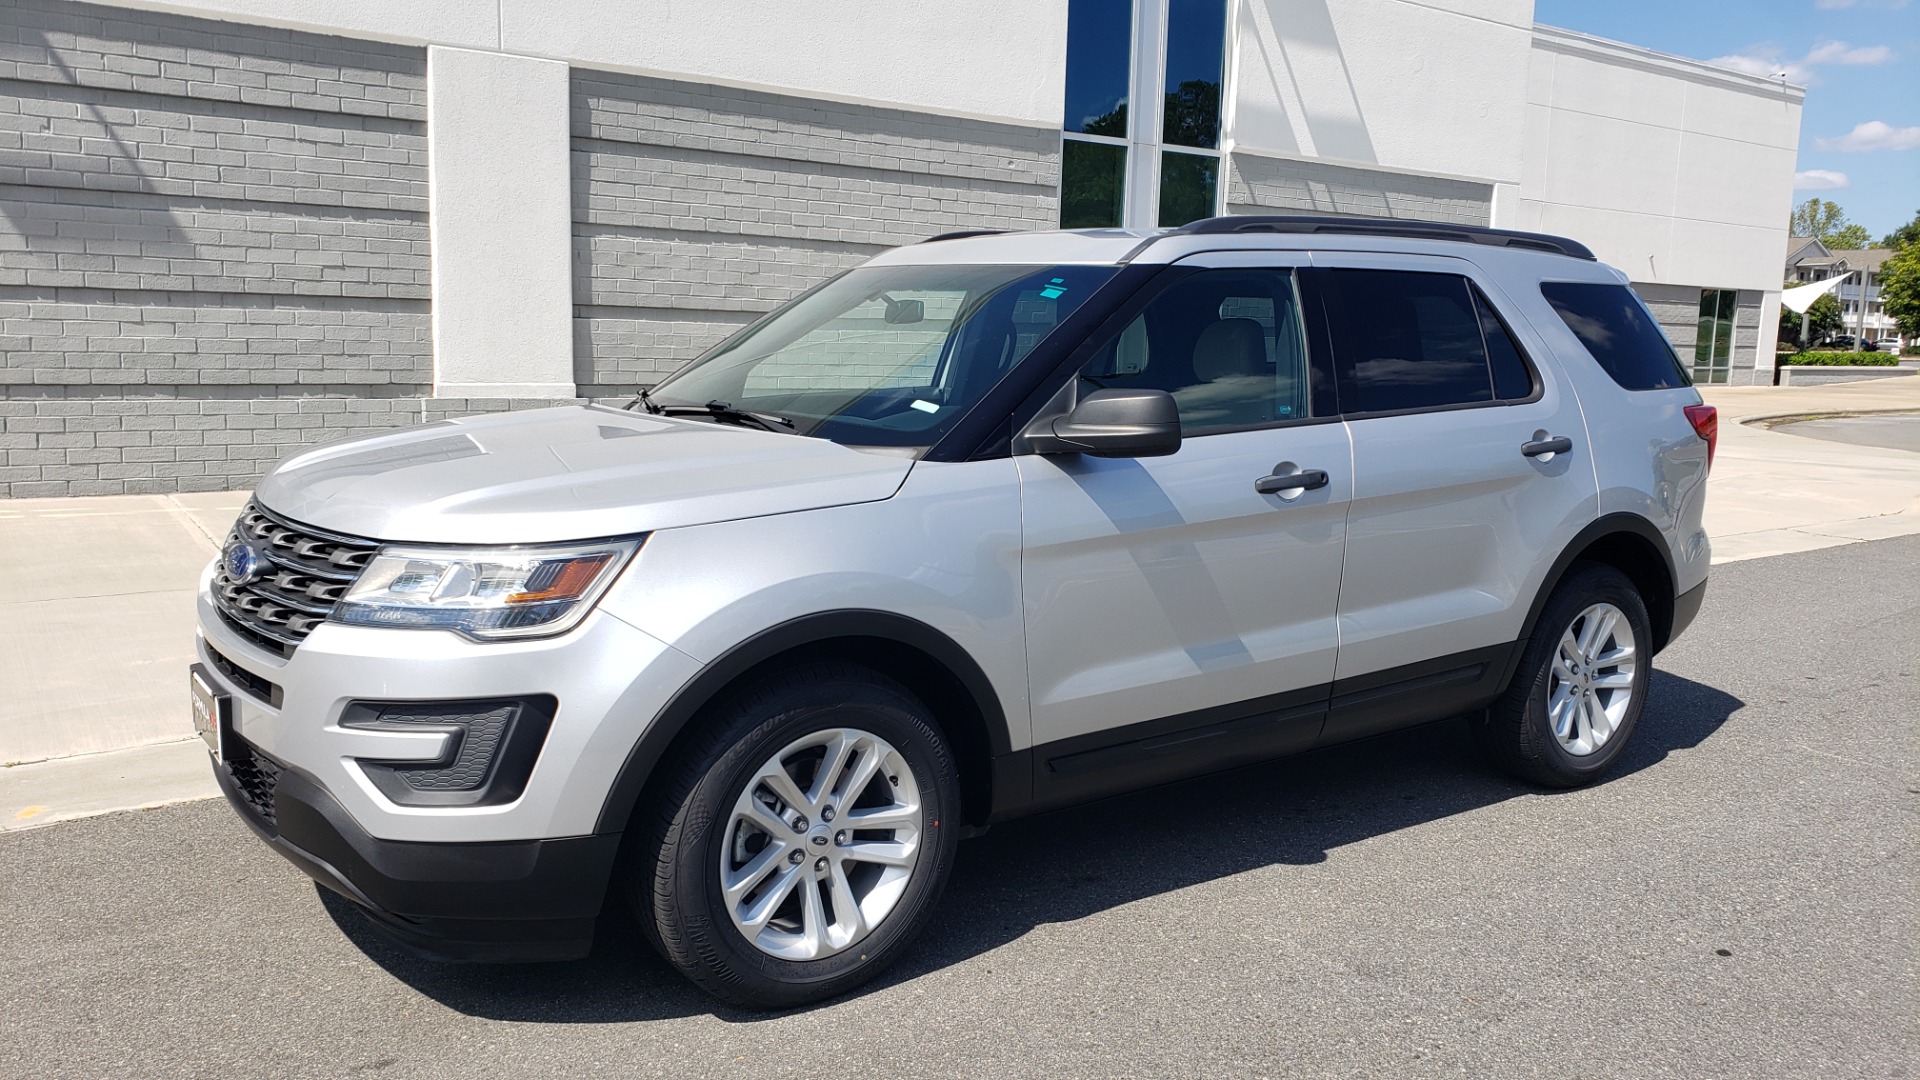 Used 2017 Ford EXPLORER 3.5L V6 / 6-SPD AUTO / BLIND SPOT MONITOR / 3-ROW / SYNC / REARVIEW for sale Sold at Formula Imports in Charlotte NC 28227 4